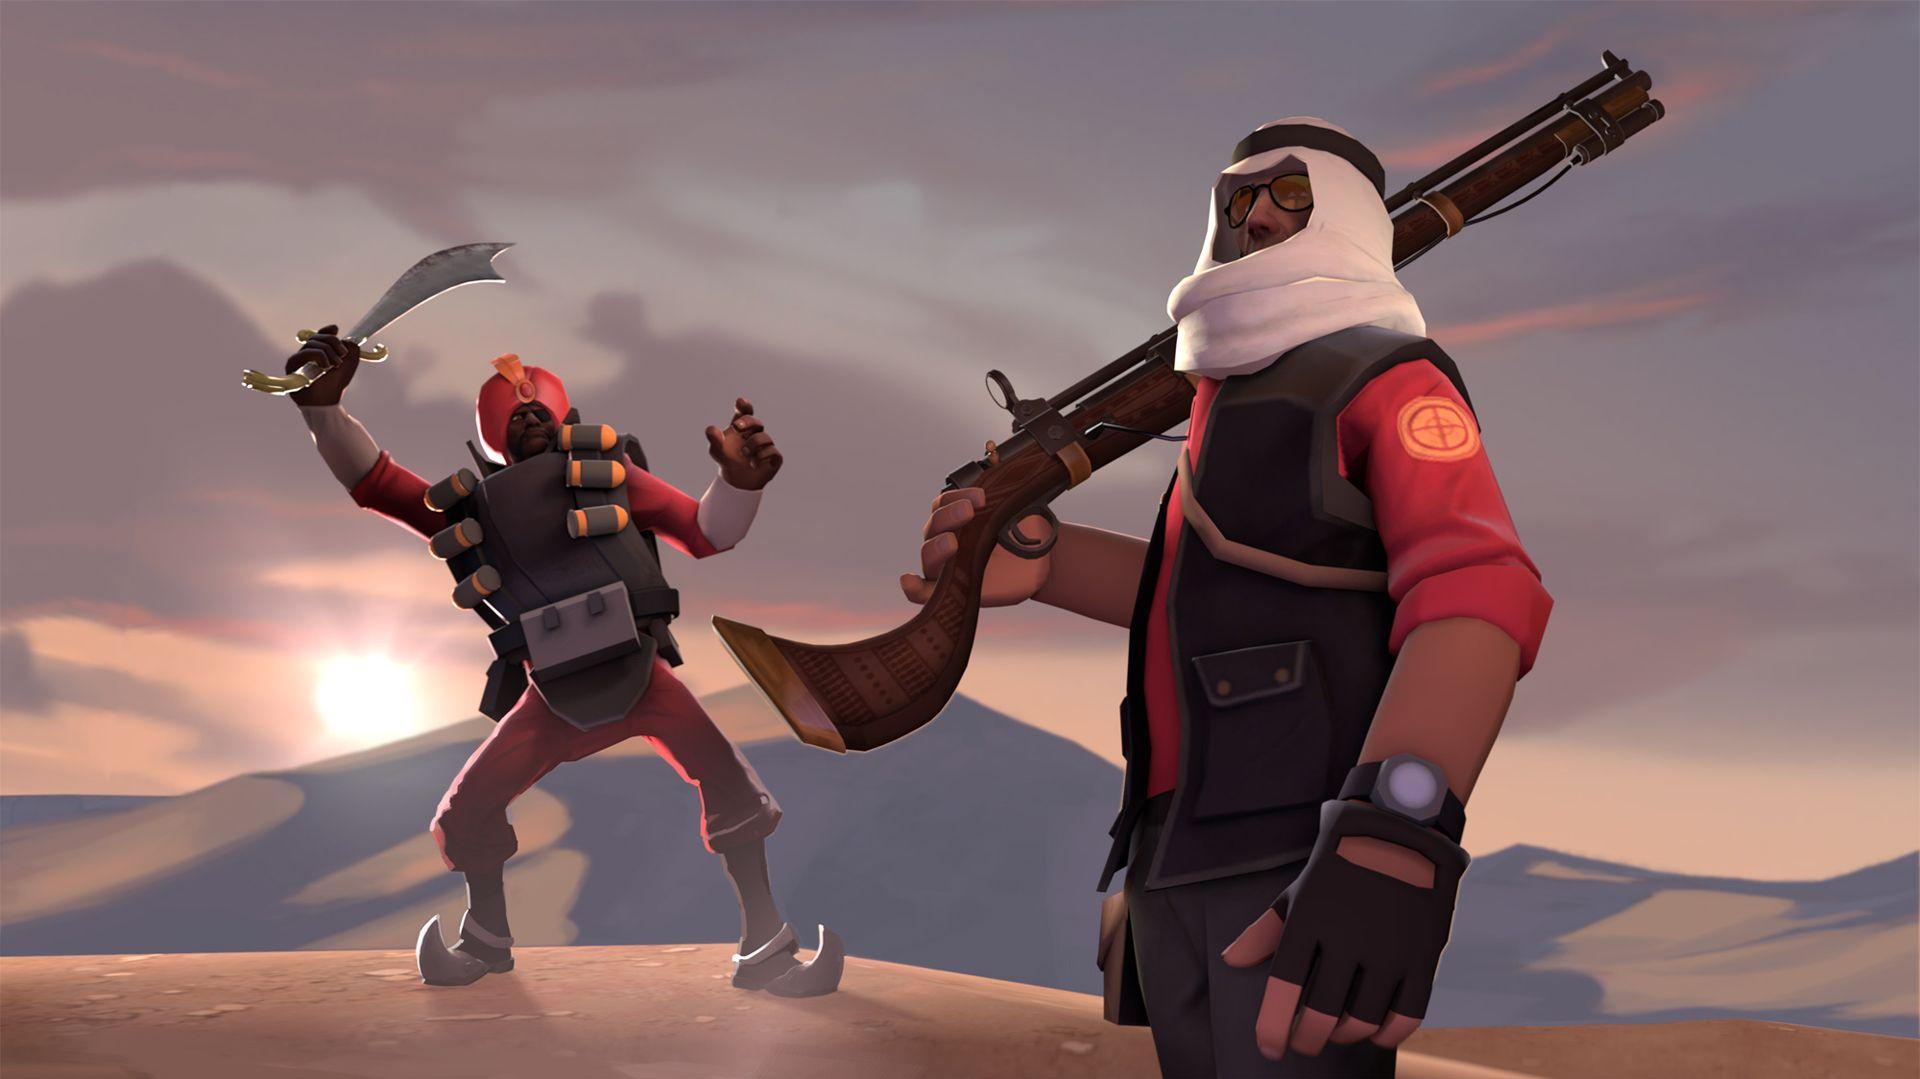 Team Fortress Wallpaper On